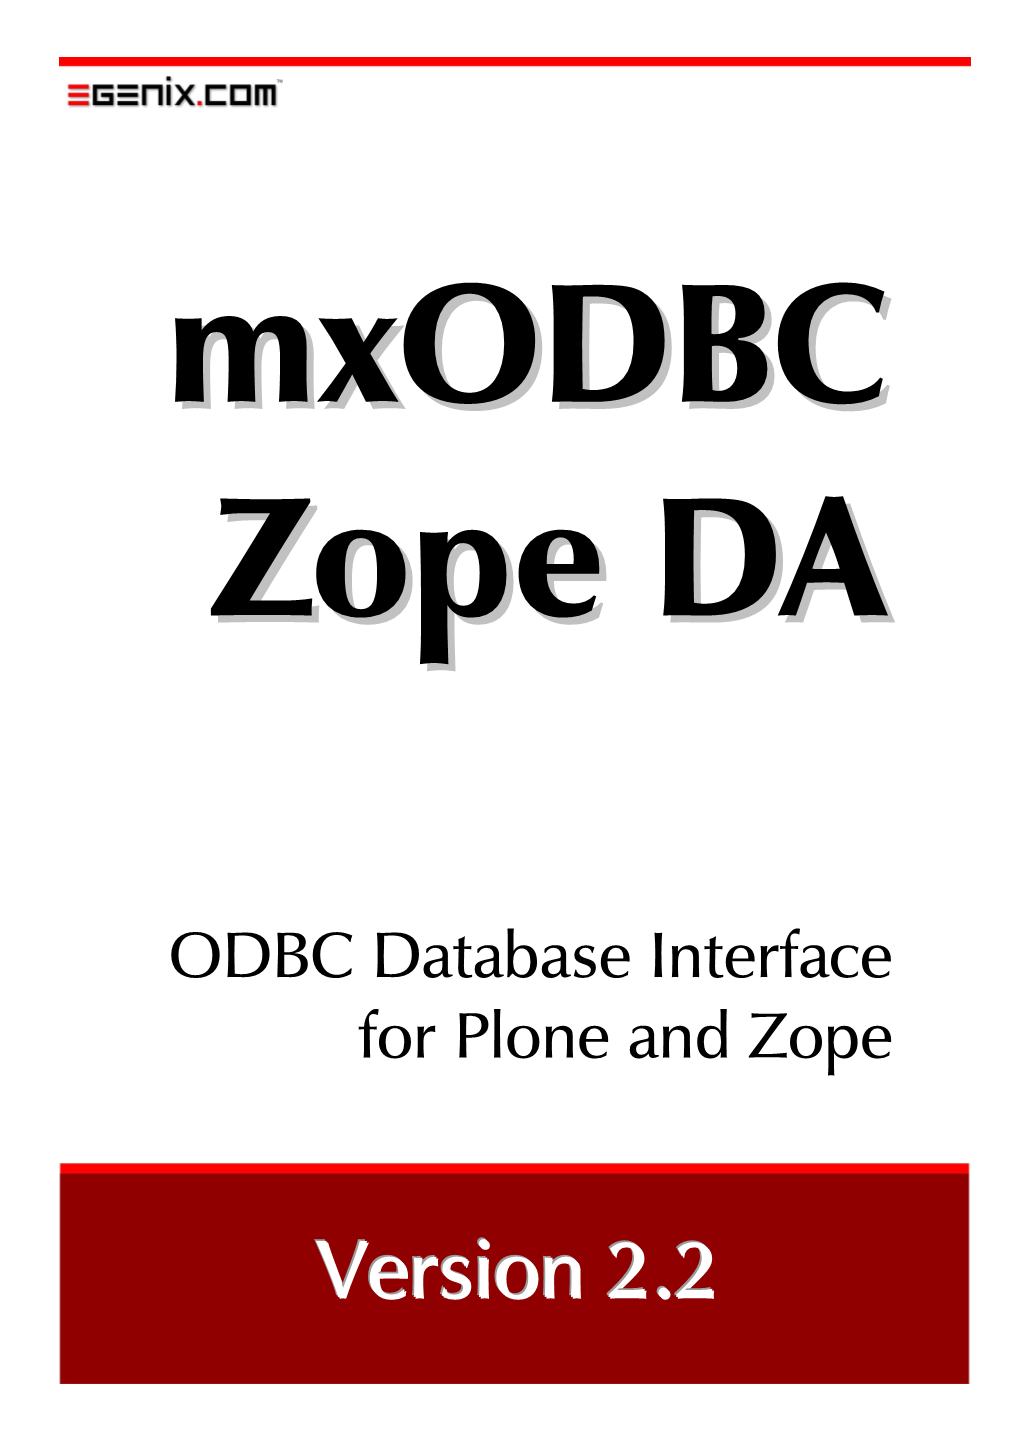 Mxodbc Plone/Zope DA - ODBC Database Interface for Plone and Zope